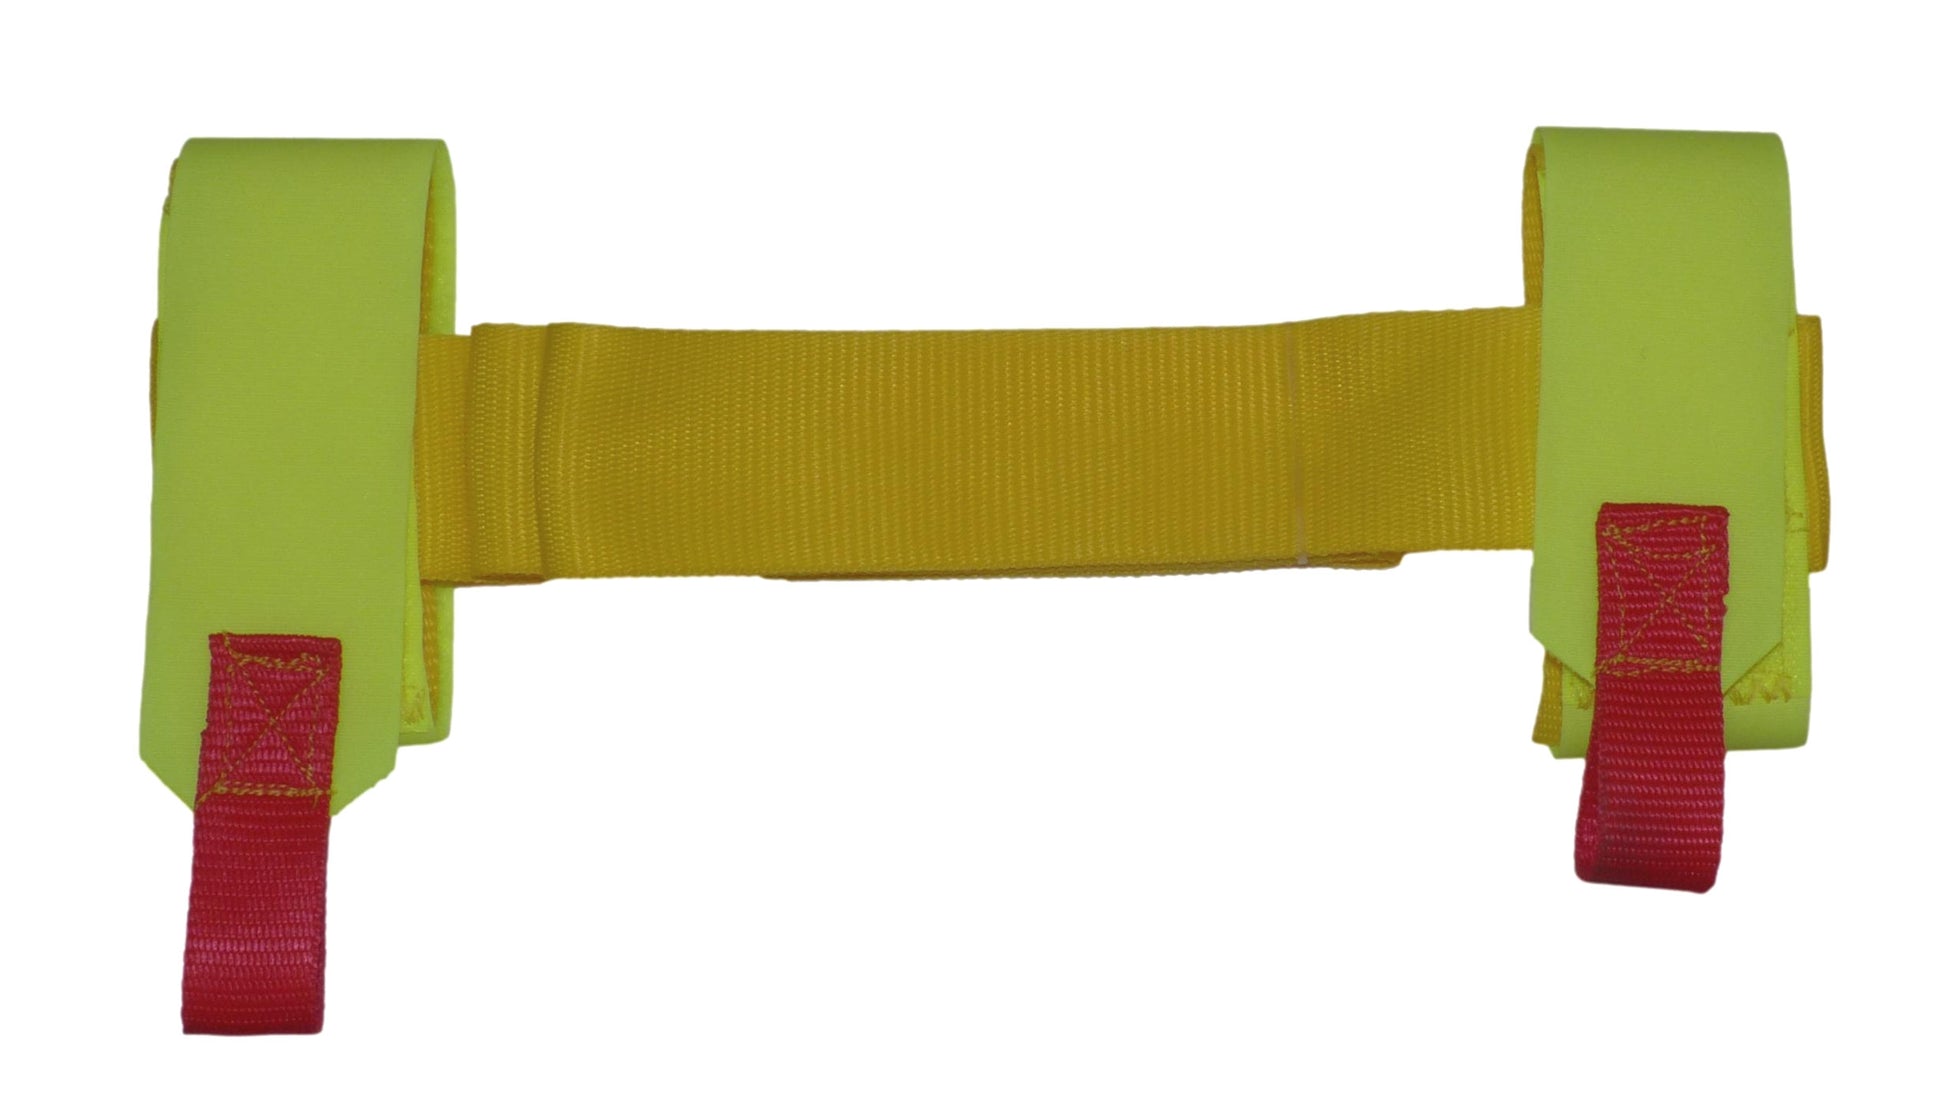 Benristraps Ski and Pole Carry Strap in yellow